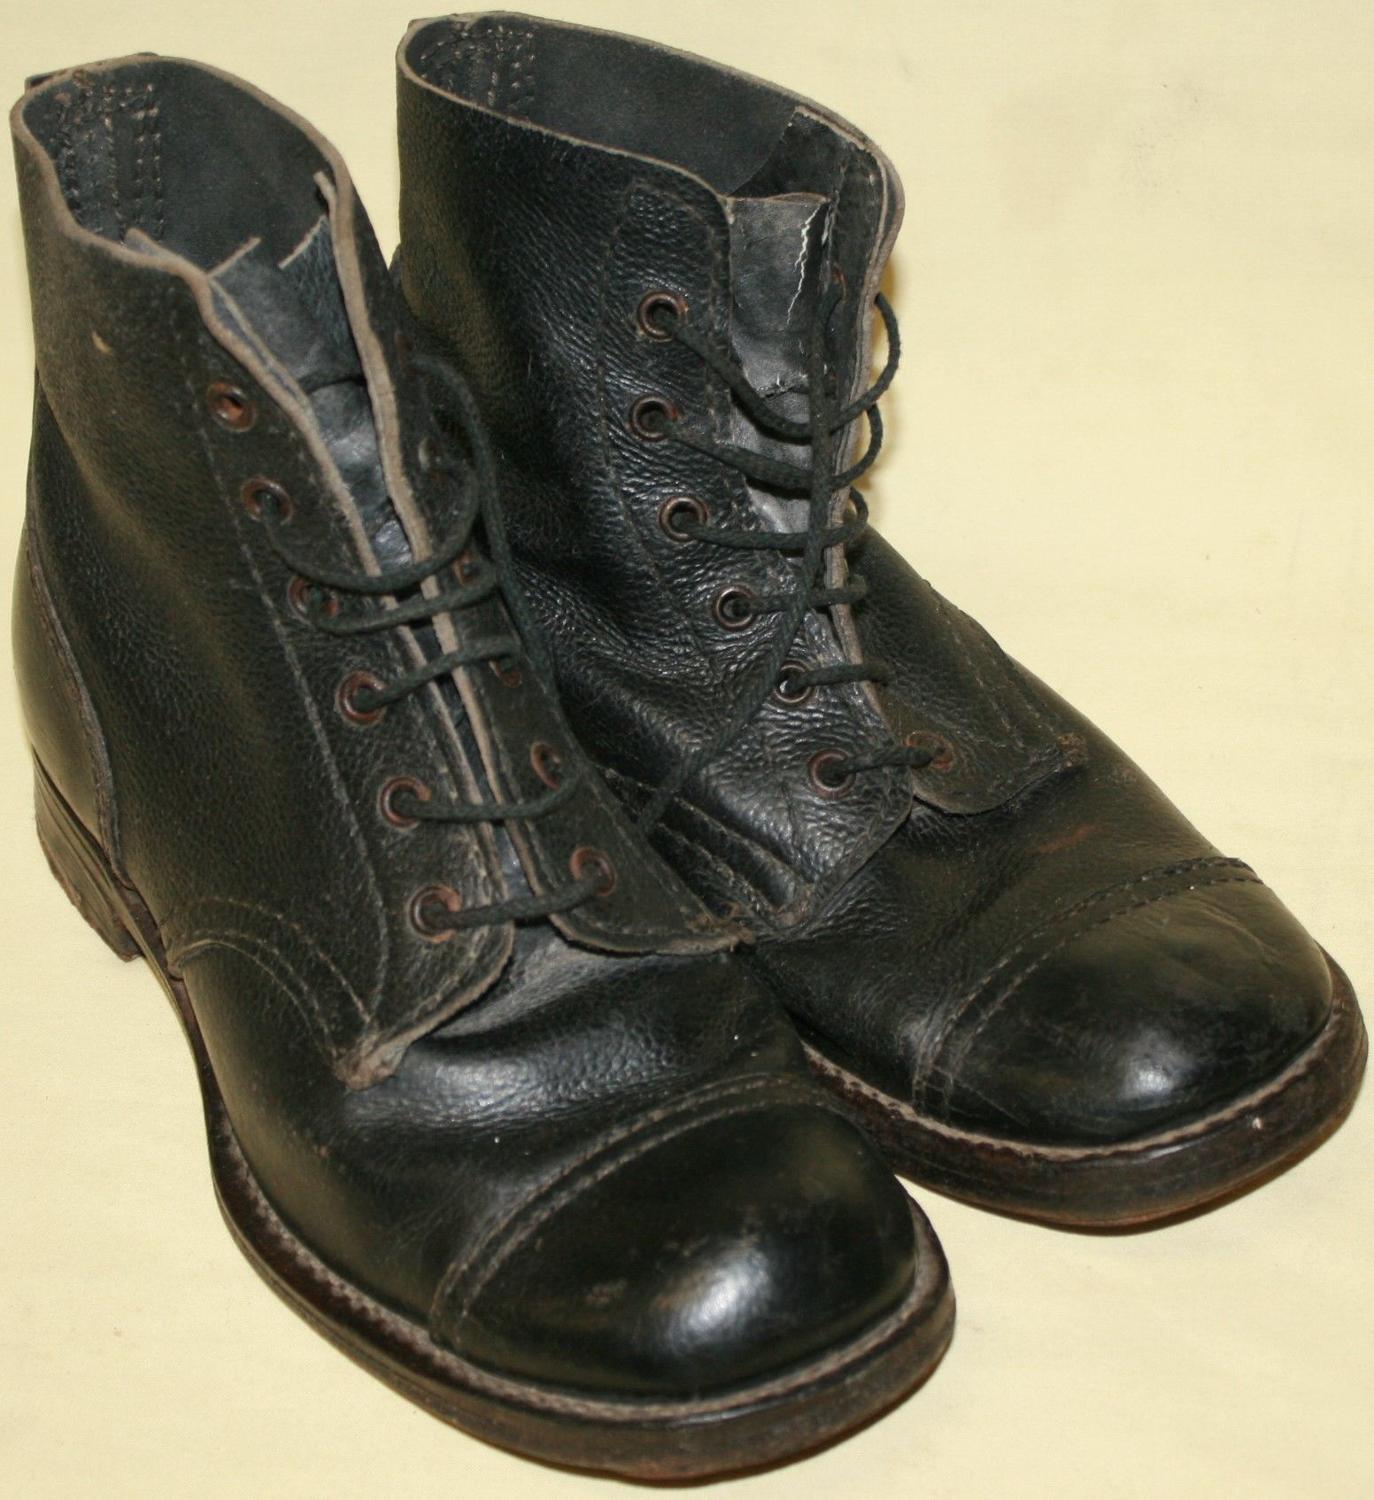 A PAIR OF SIZE 8 M 1944 DATED HOBNAIL BOOTS